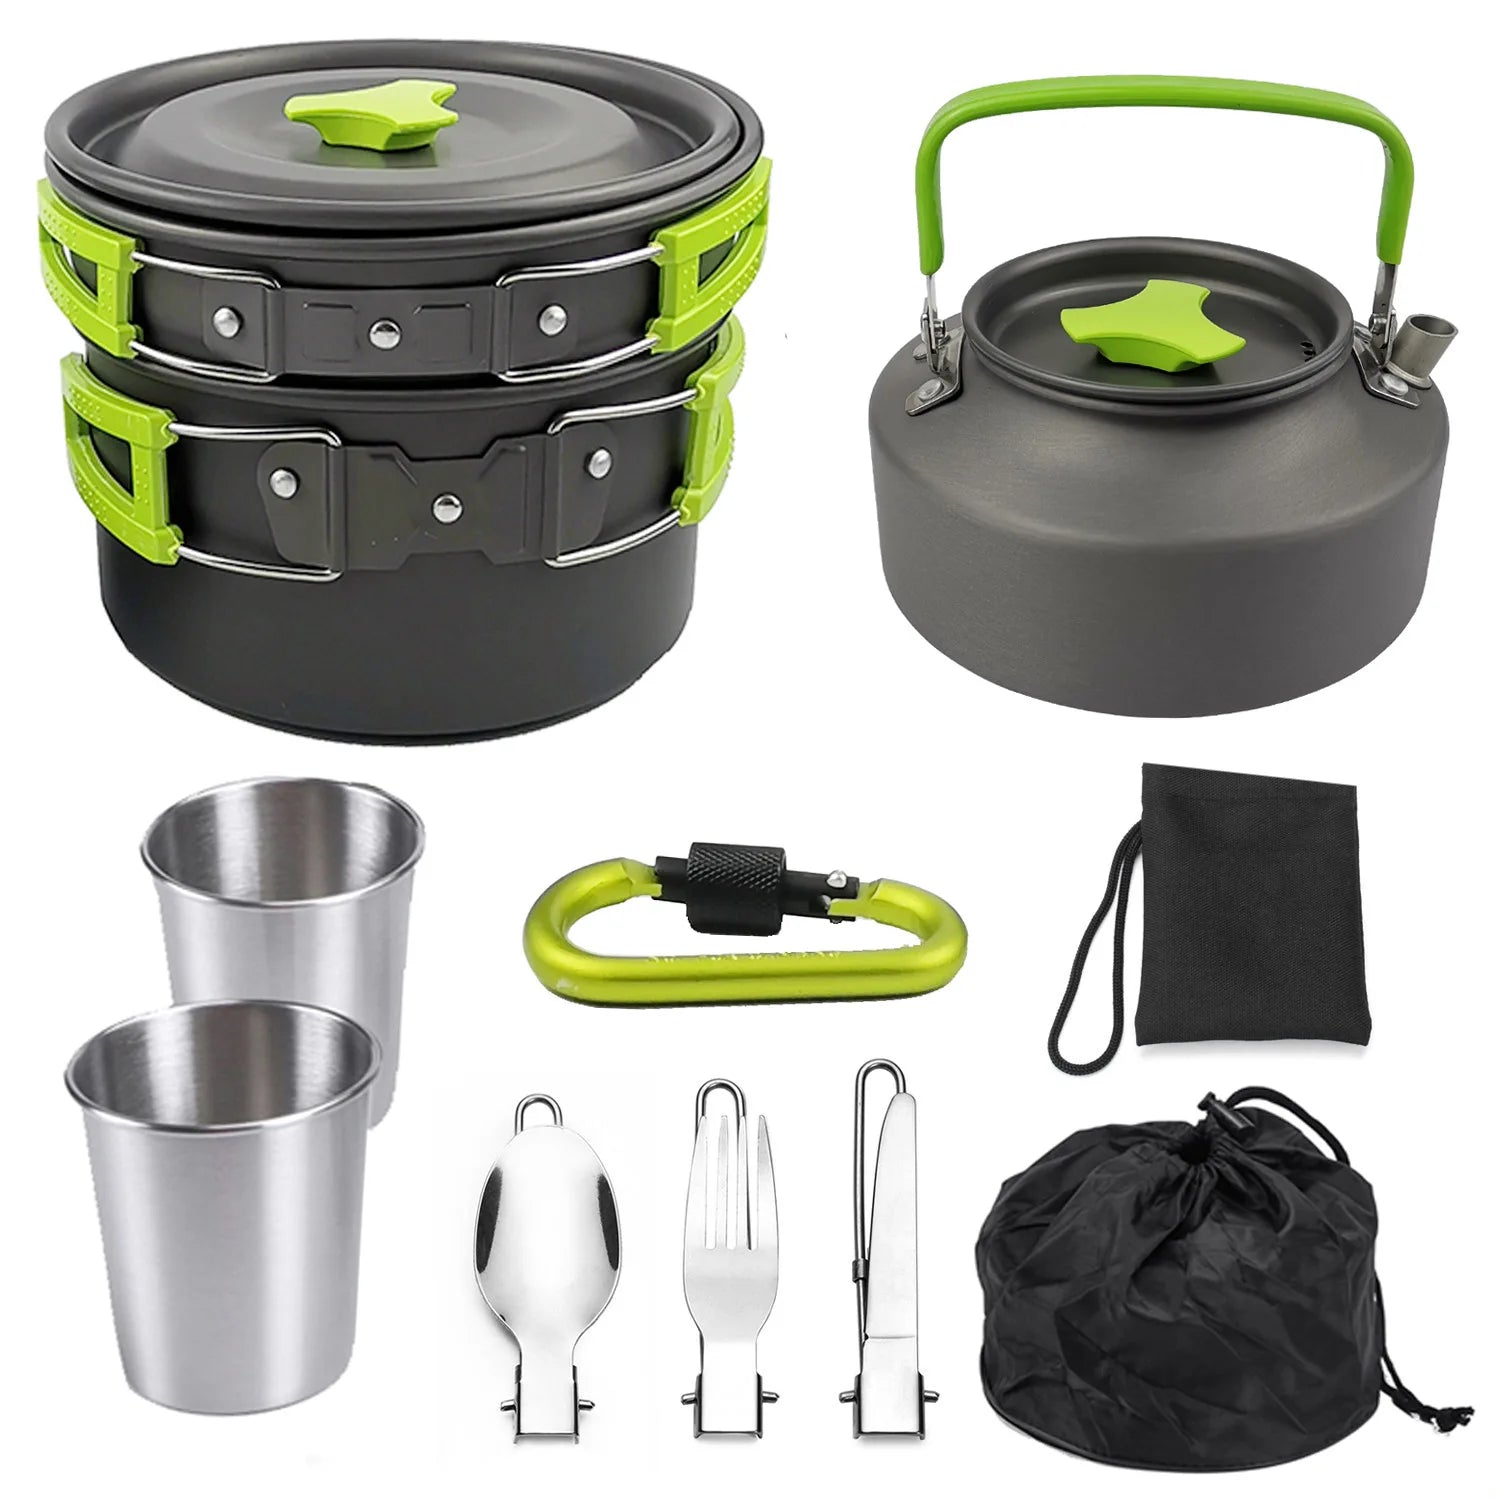 High quality Outdoor teapot pot set combination Portable Cookware Nonstick Pot Kettle Set Camping Mess Kit for HIking Campfire - Tatooine Nomad